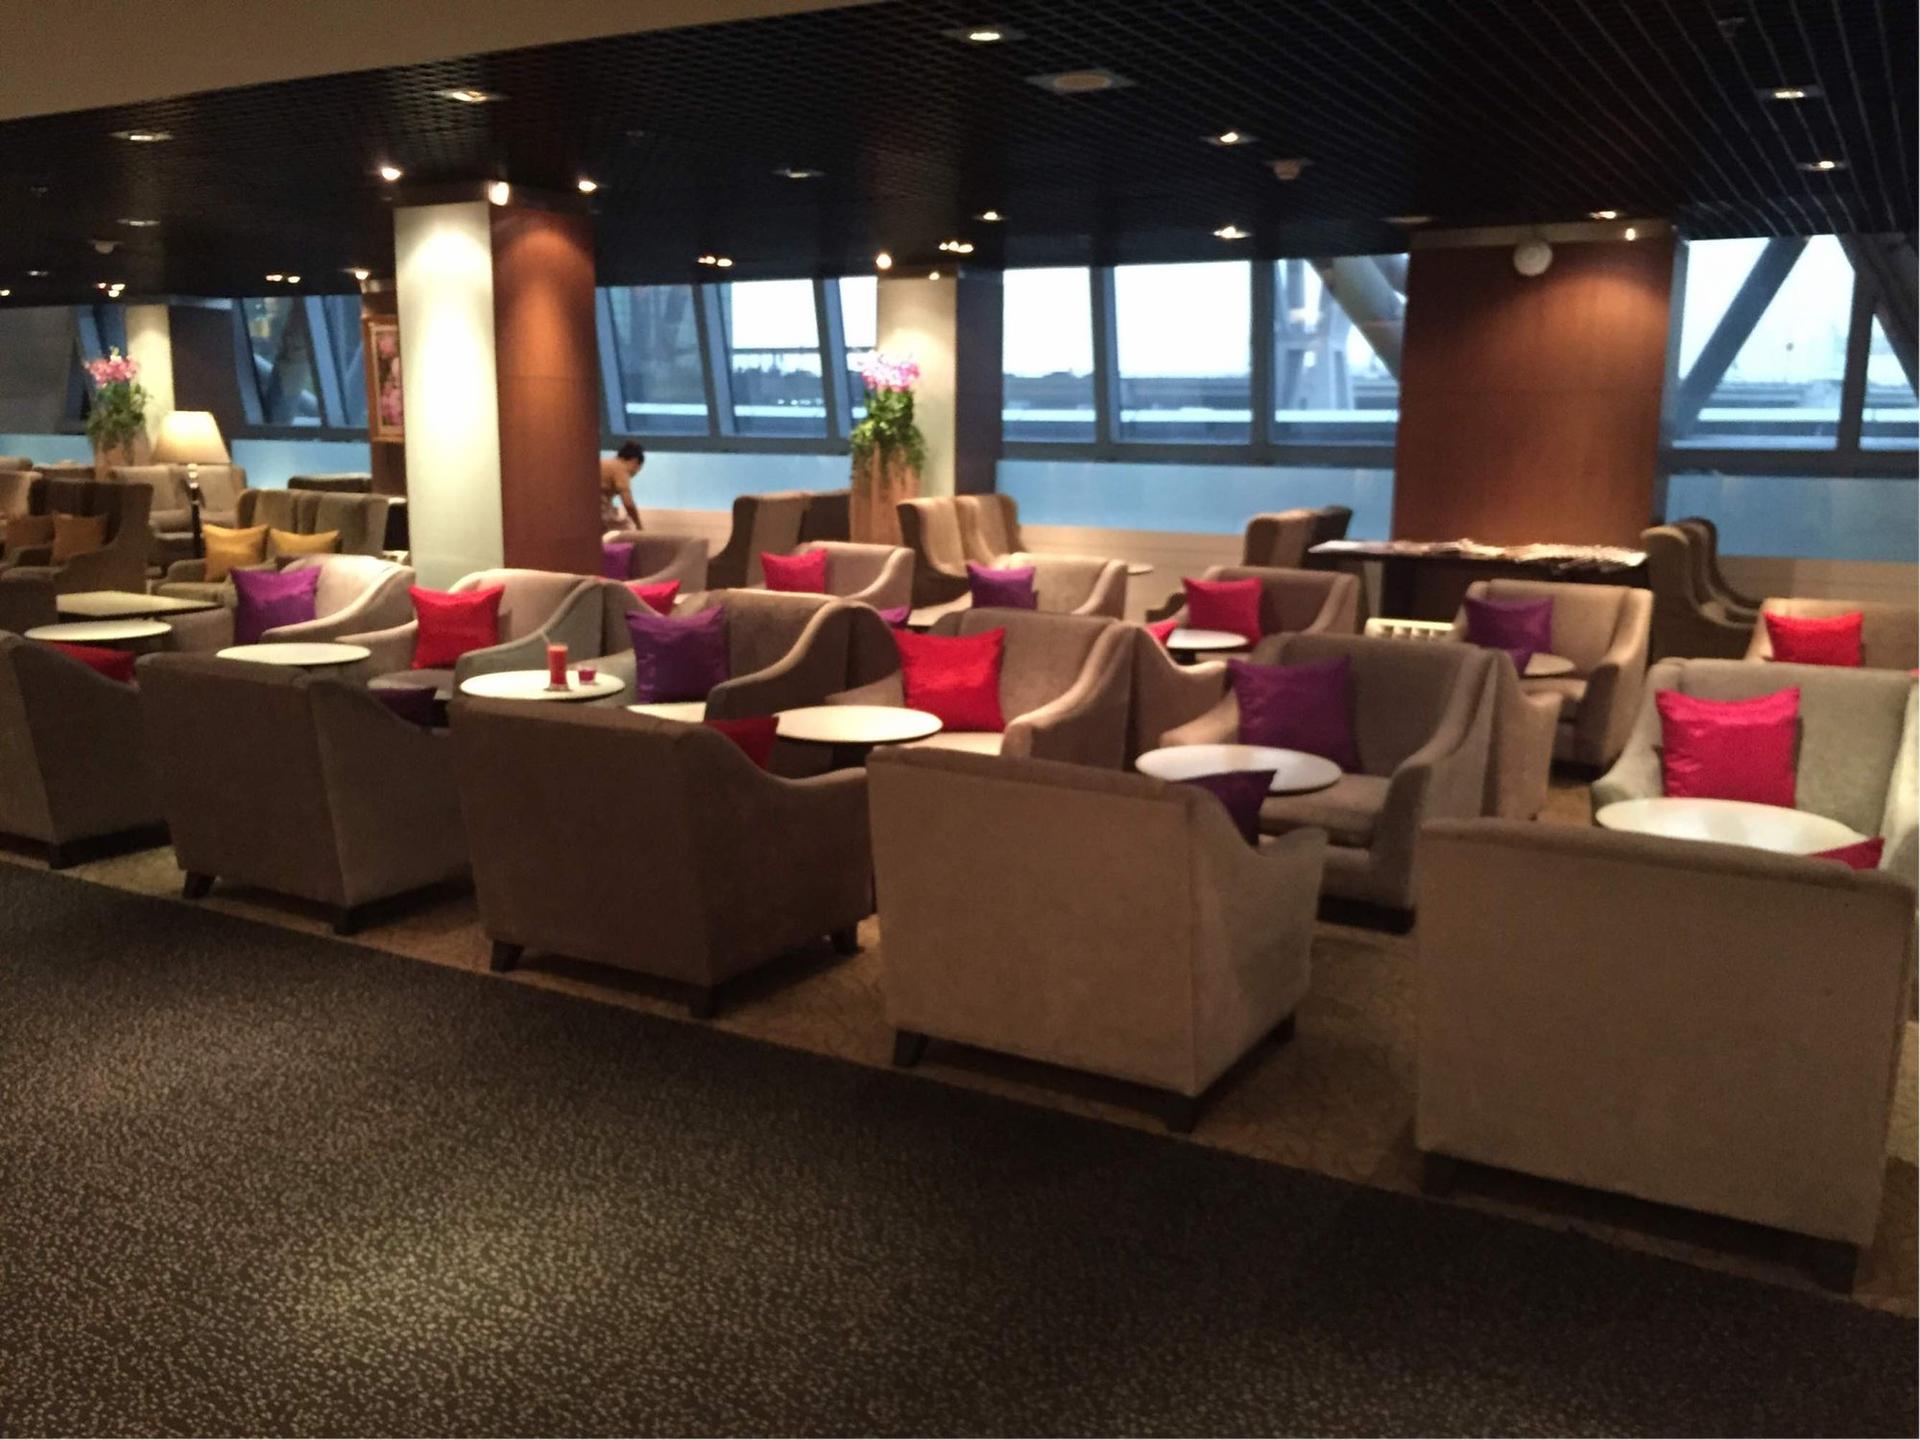 Thai Airways Royal First Class Lounge image 13 of 44